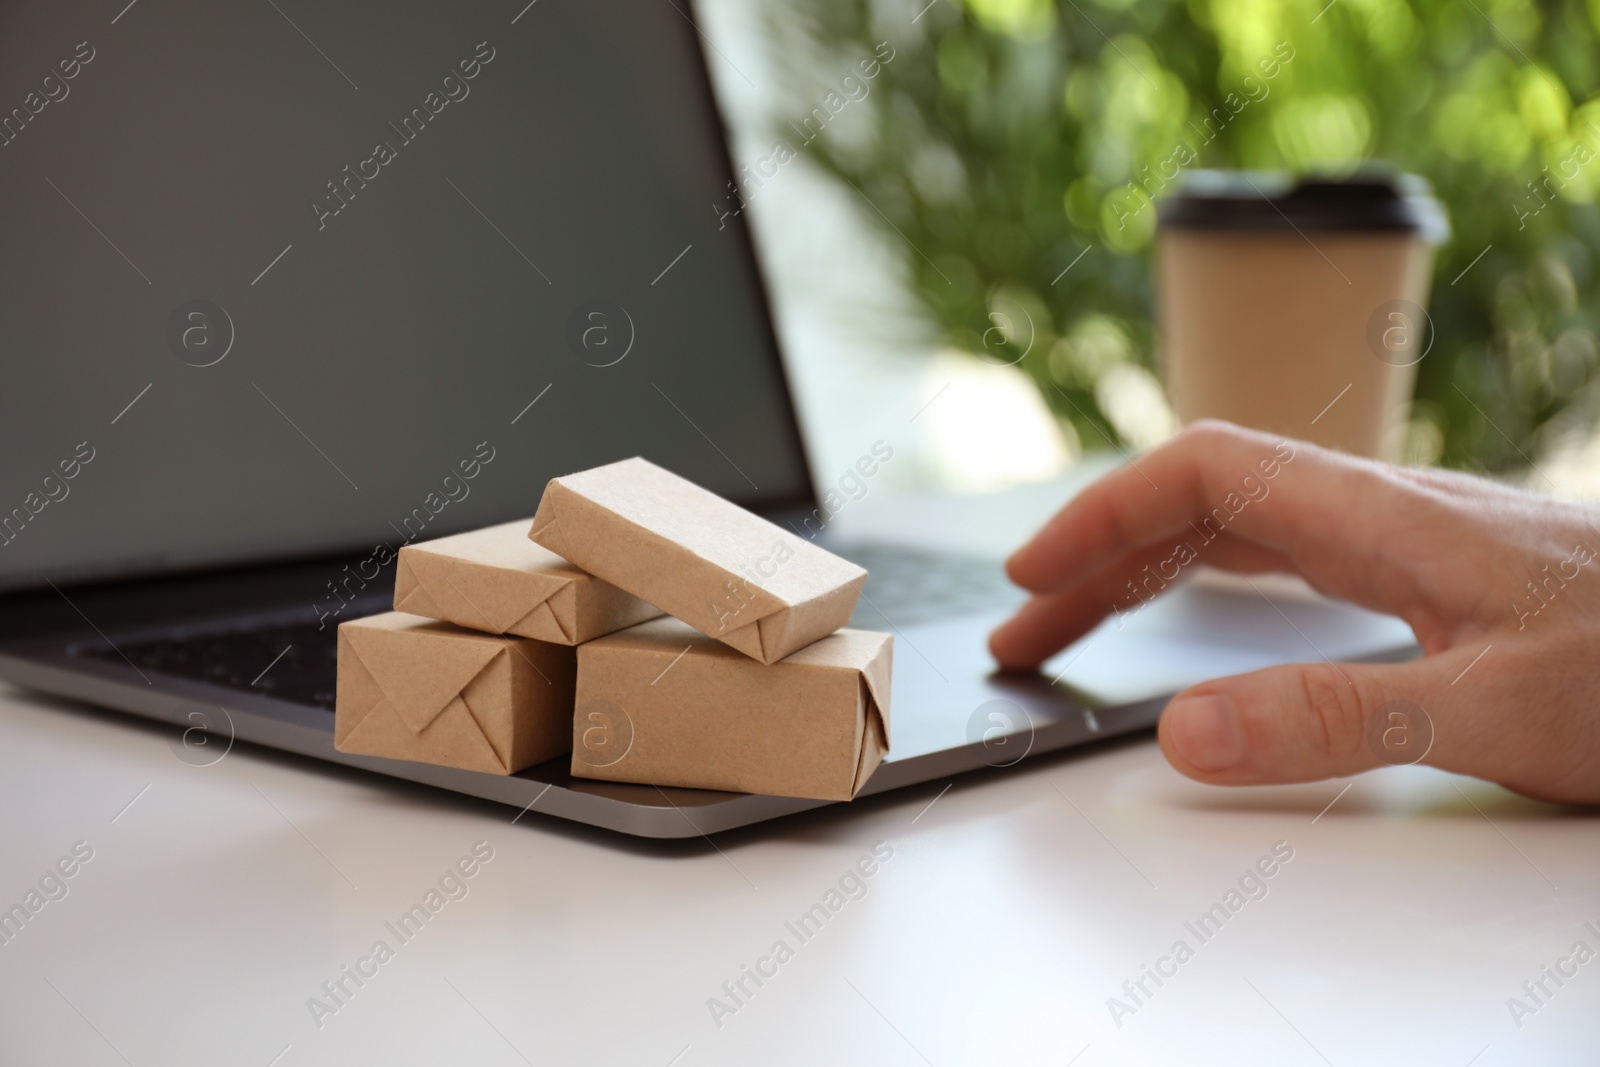 Photo of Internet shopping. Small boxes near man using laptop at table indoors, closeup